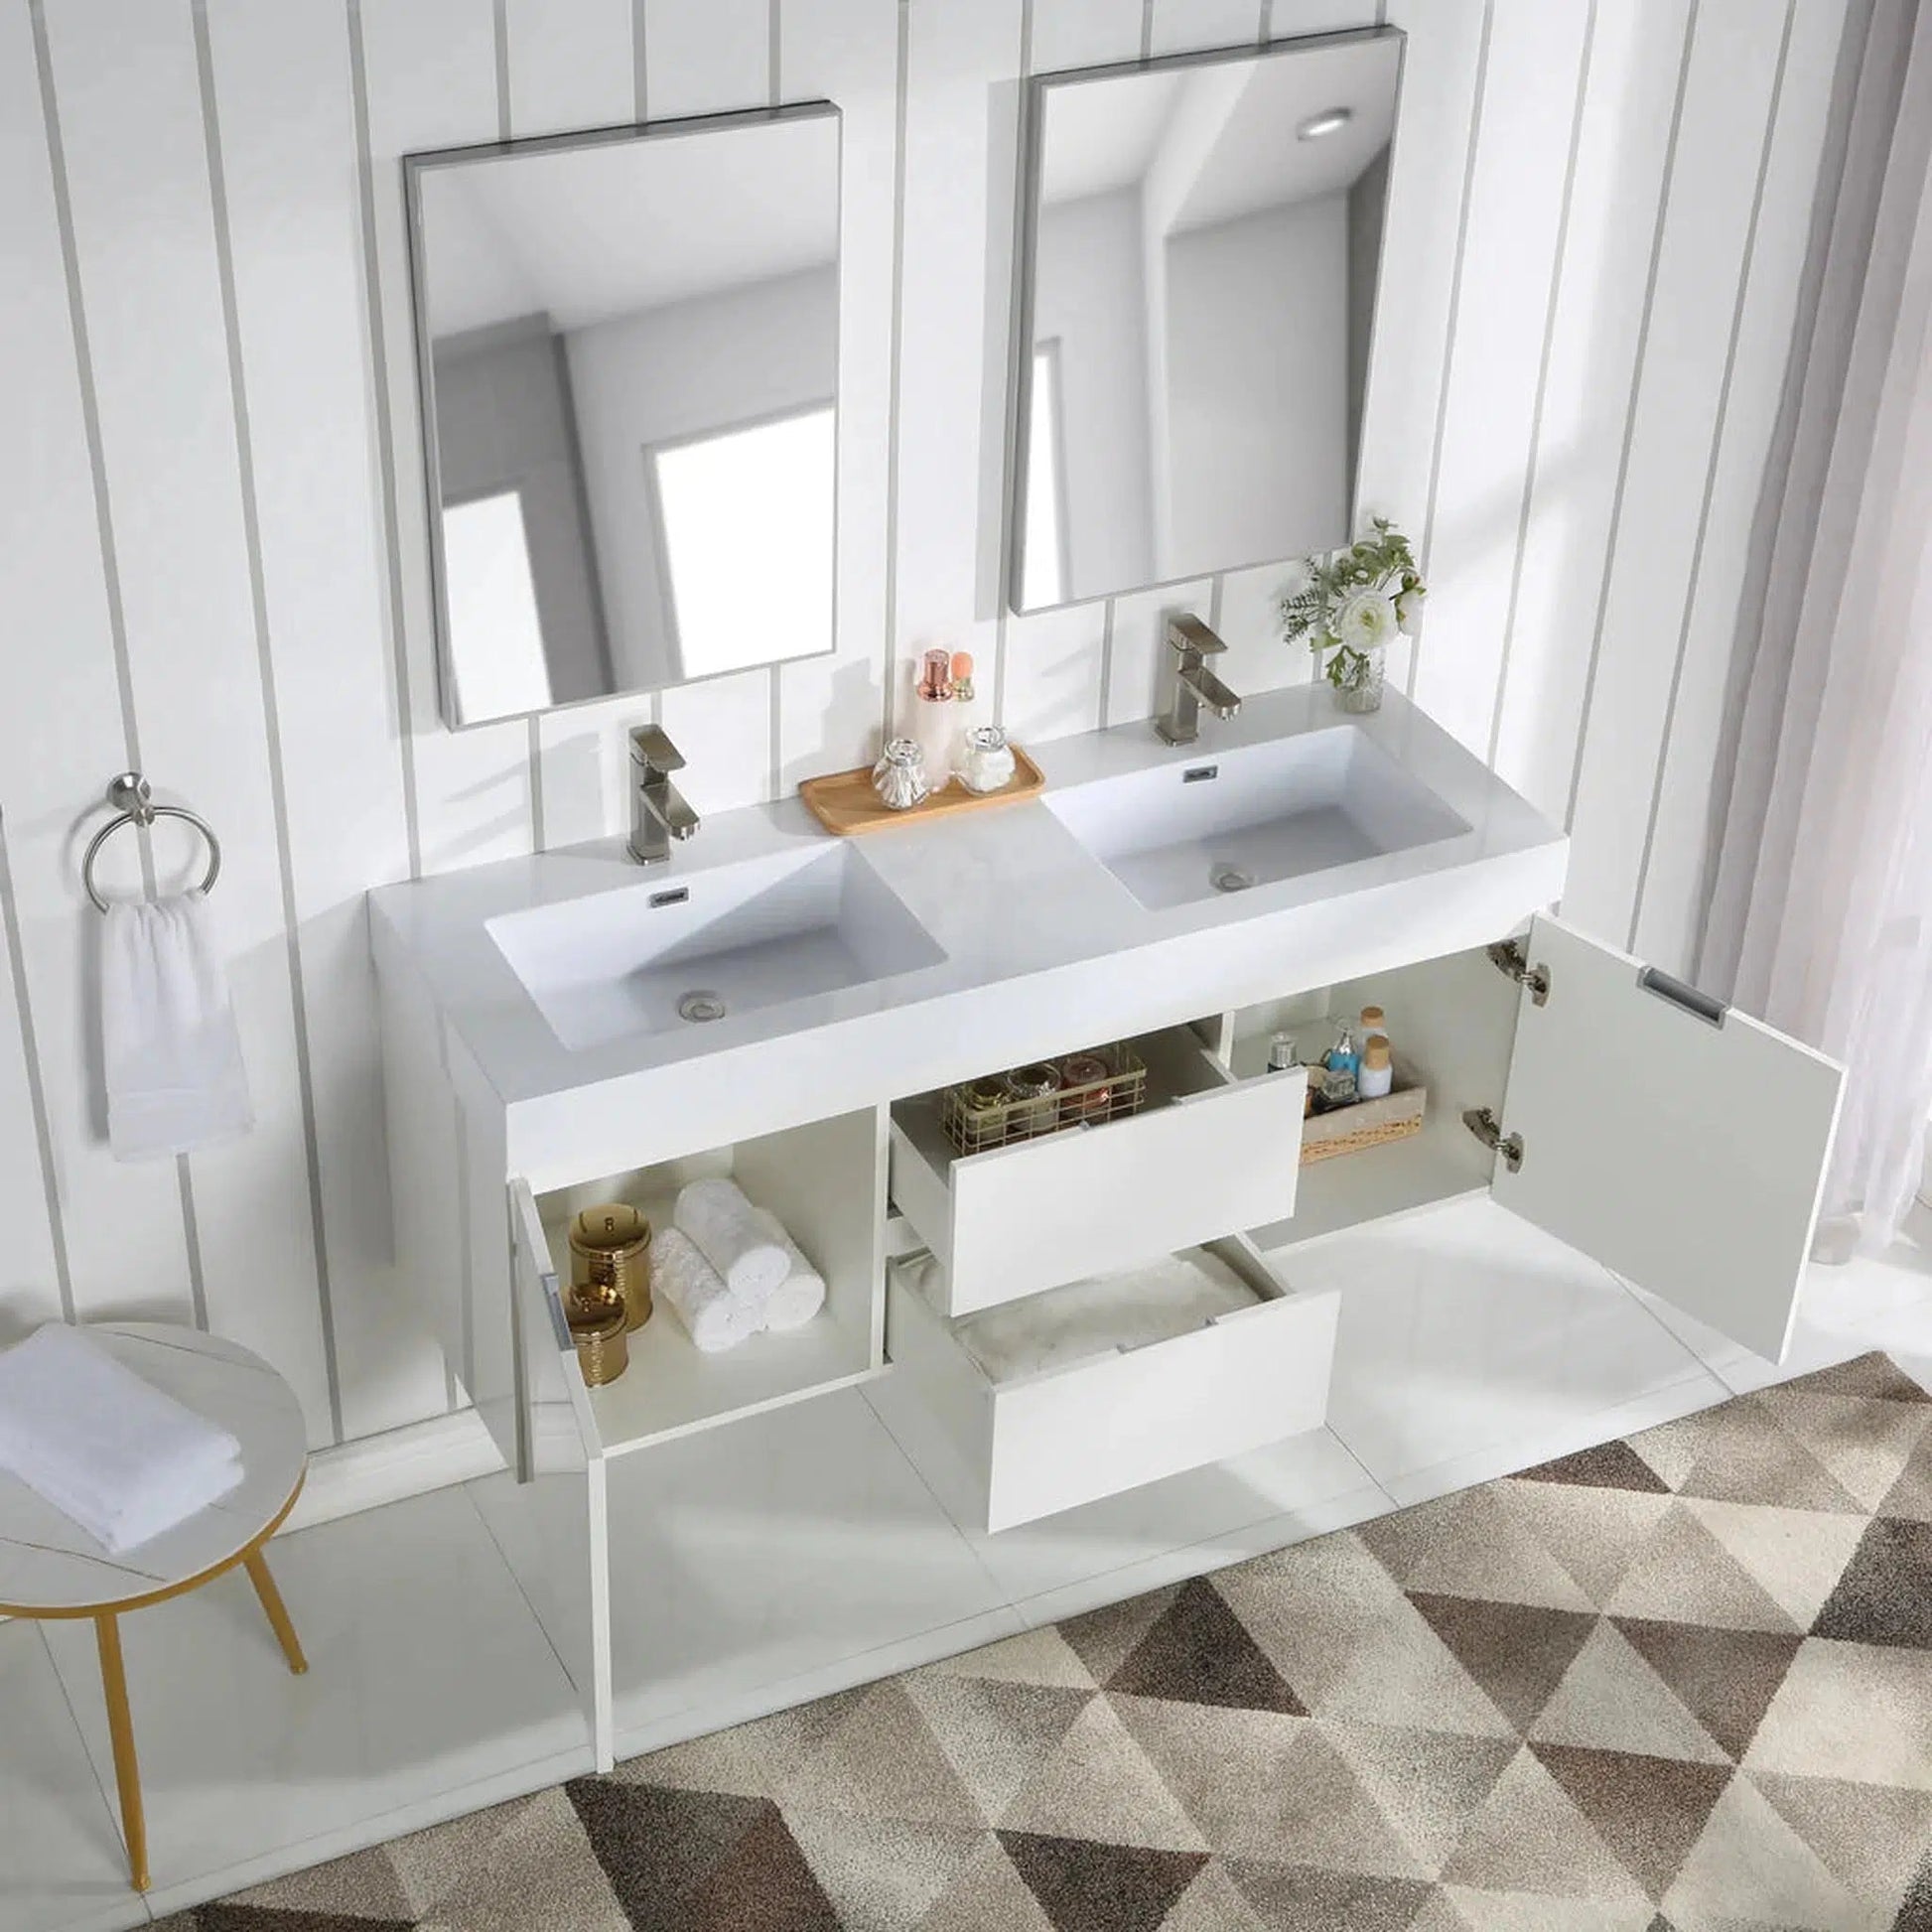 https://usbathstore.com/cdn/shop/products/Stufurhome-Valeria-59-Gloss-White-Wall-Mounted-Double-Sink-Bathroom-Vanity-with-Rectangular-Double-Resin-Sinks-2-Drawers-2-Doors-and-2-Pre-Drilled-Faucet-Holes-5.webp?v=1671817400&width=1946